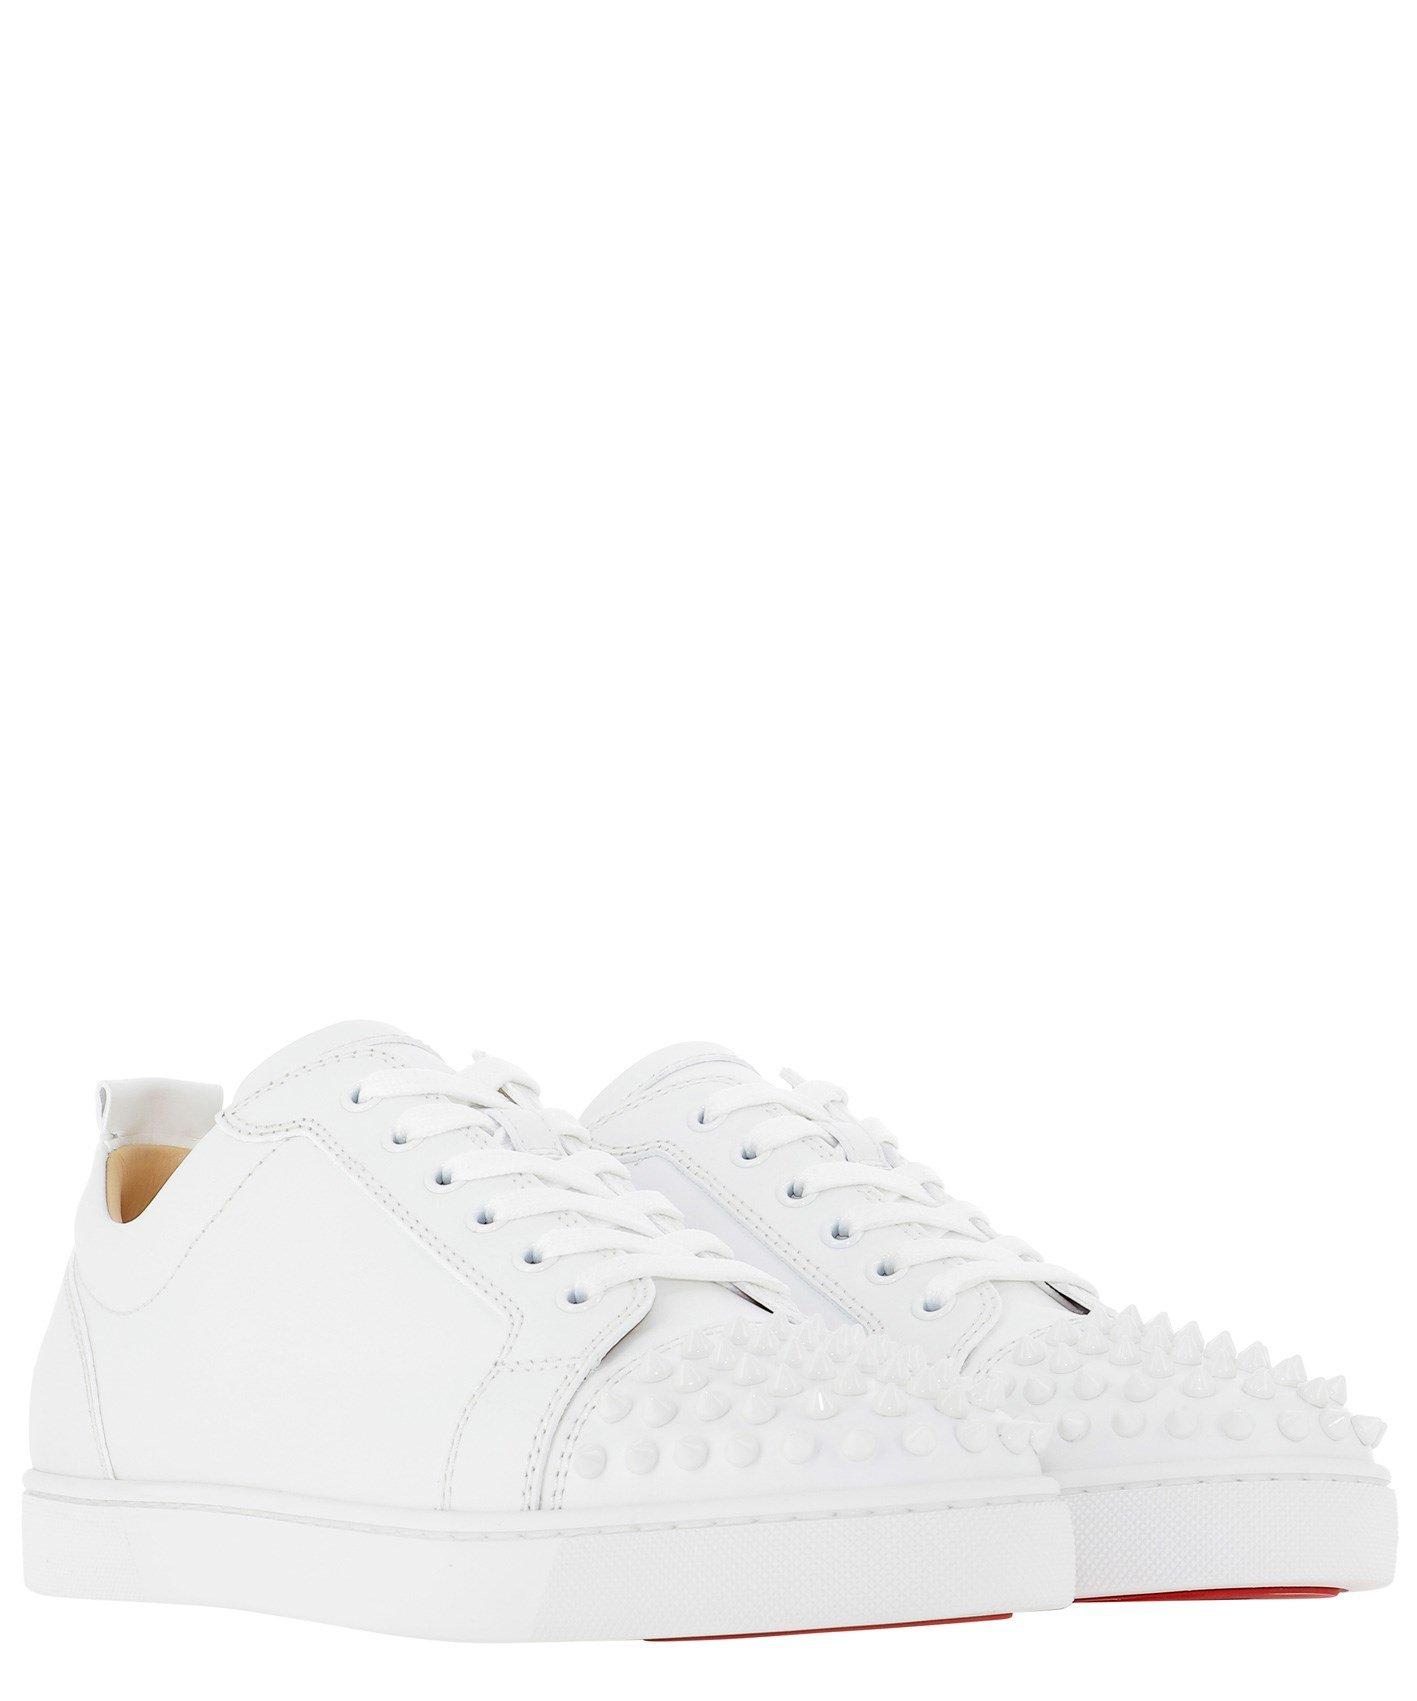 Christian Louboutin Louis Junior Leather Sneaker in White for Men - Save  36% - Lyst